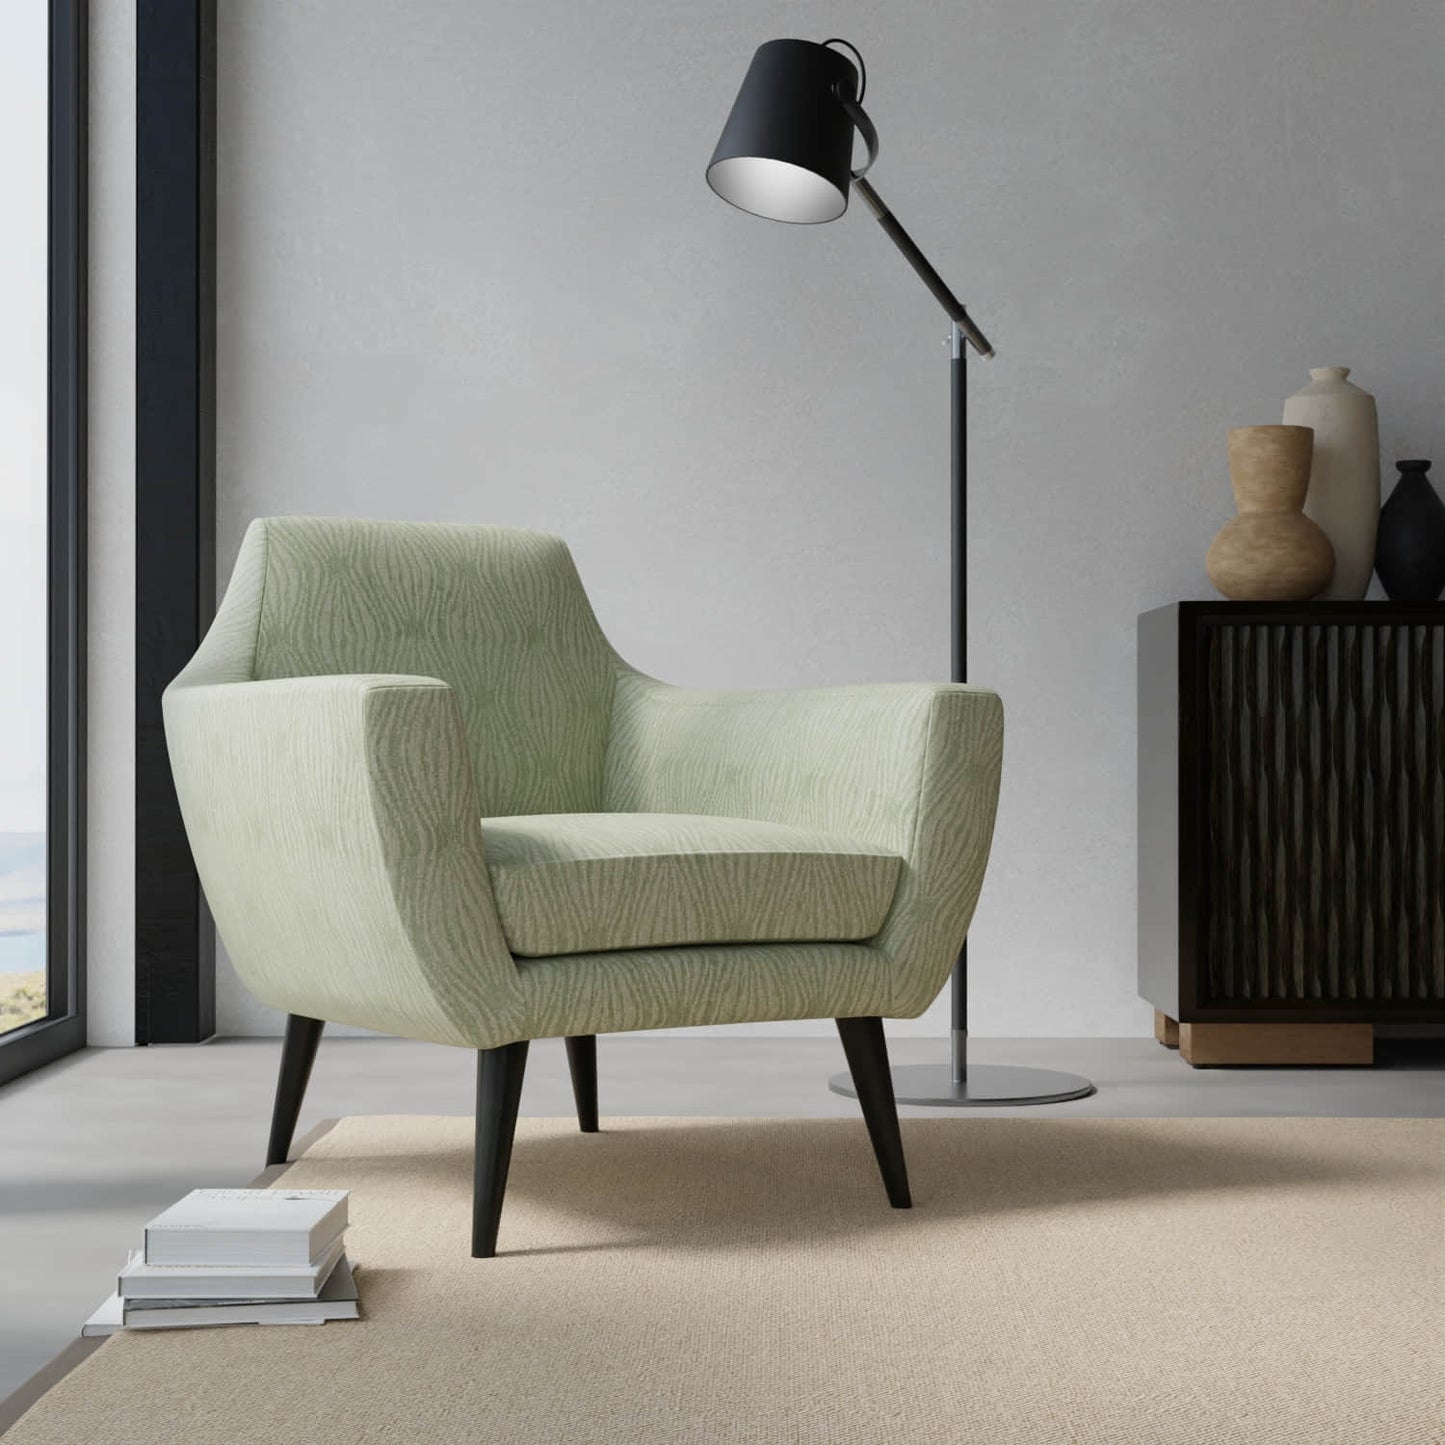 Afton Mint upholstered on a contemporary chair